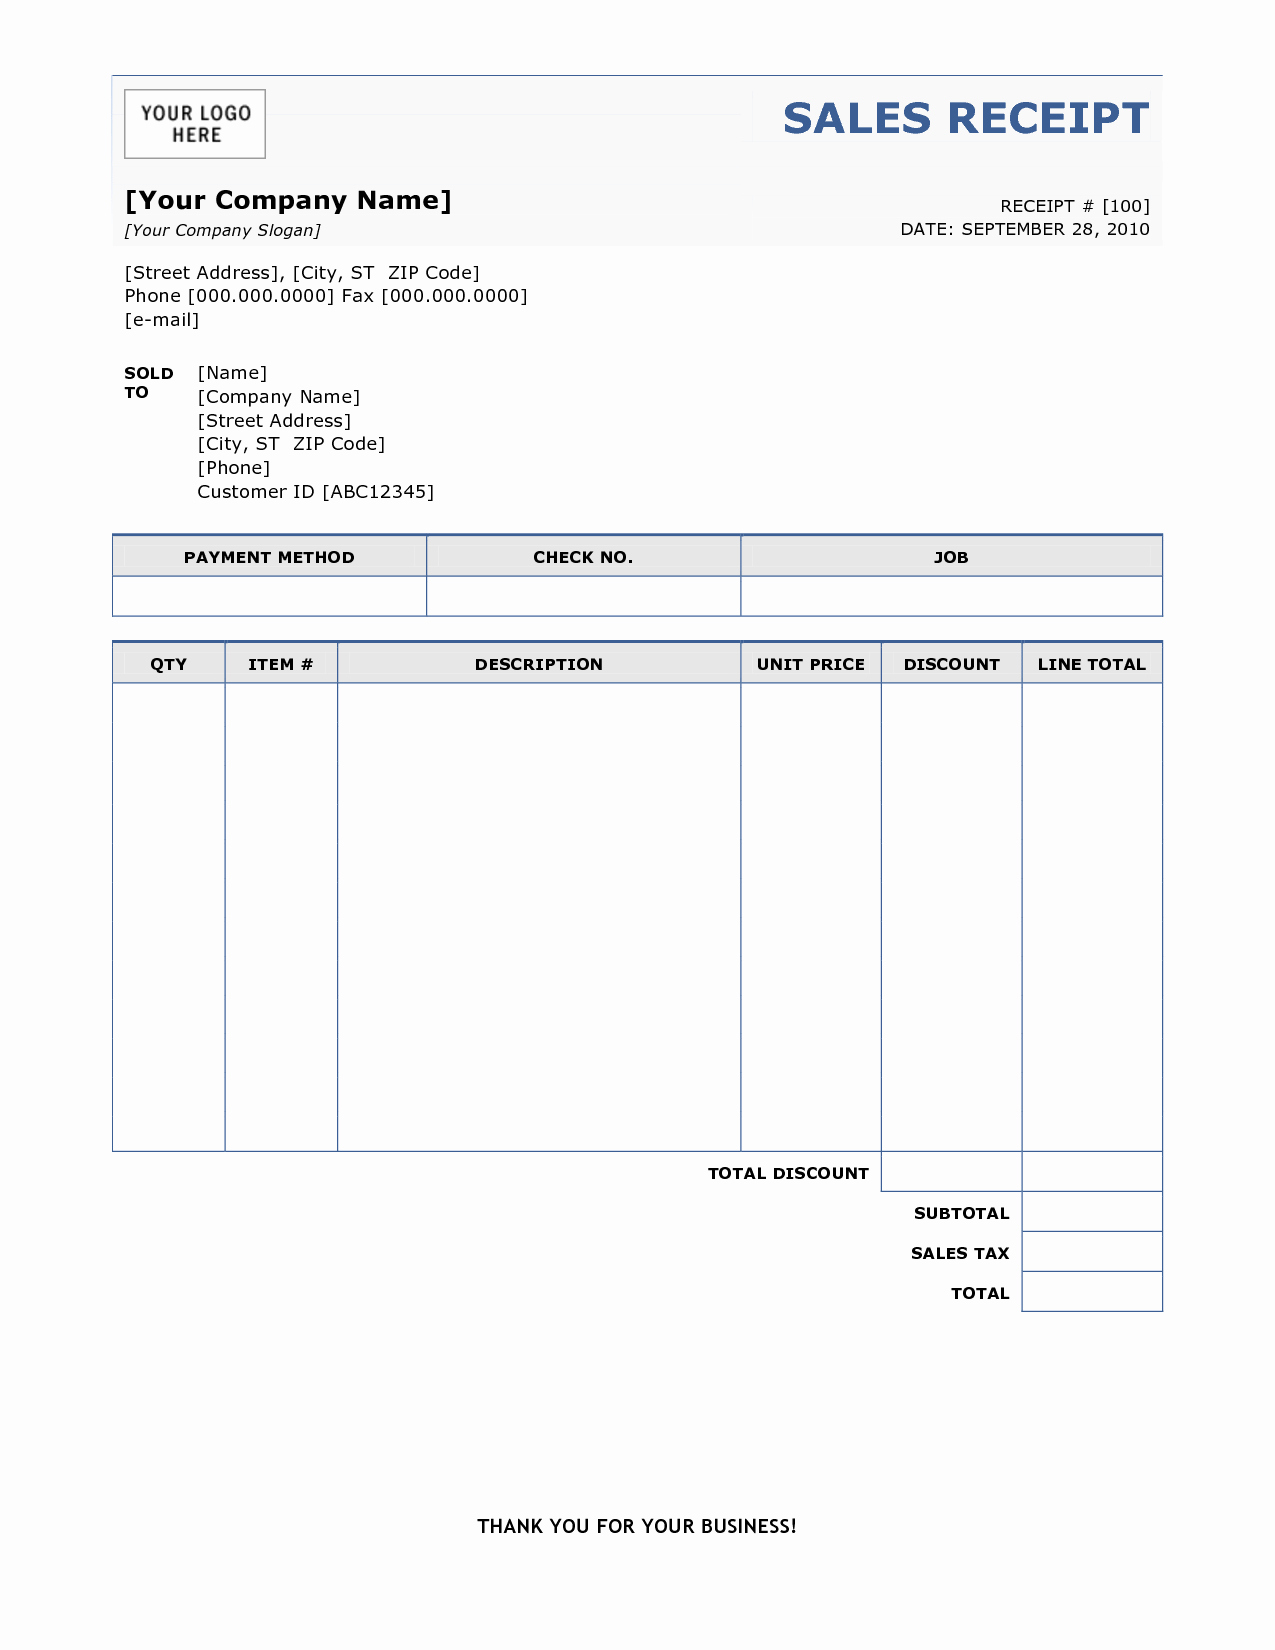 Sales Receipt Template Excel Beautiful 6 Free Sales Receipt Templates Excel Pdf formats